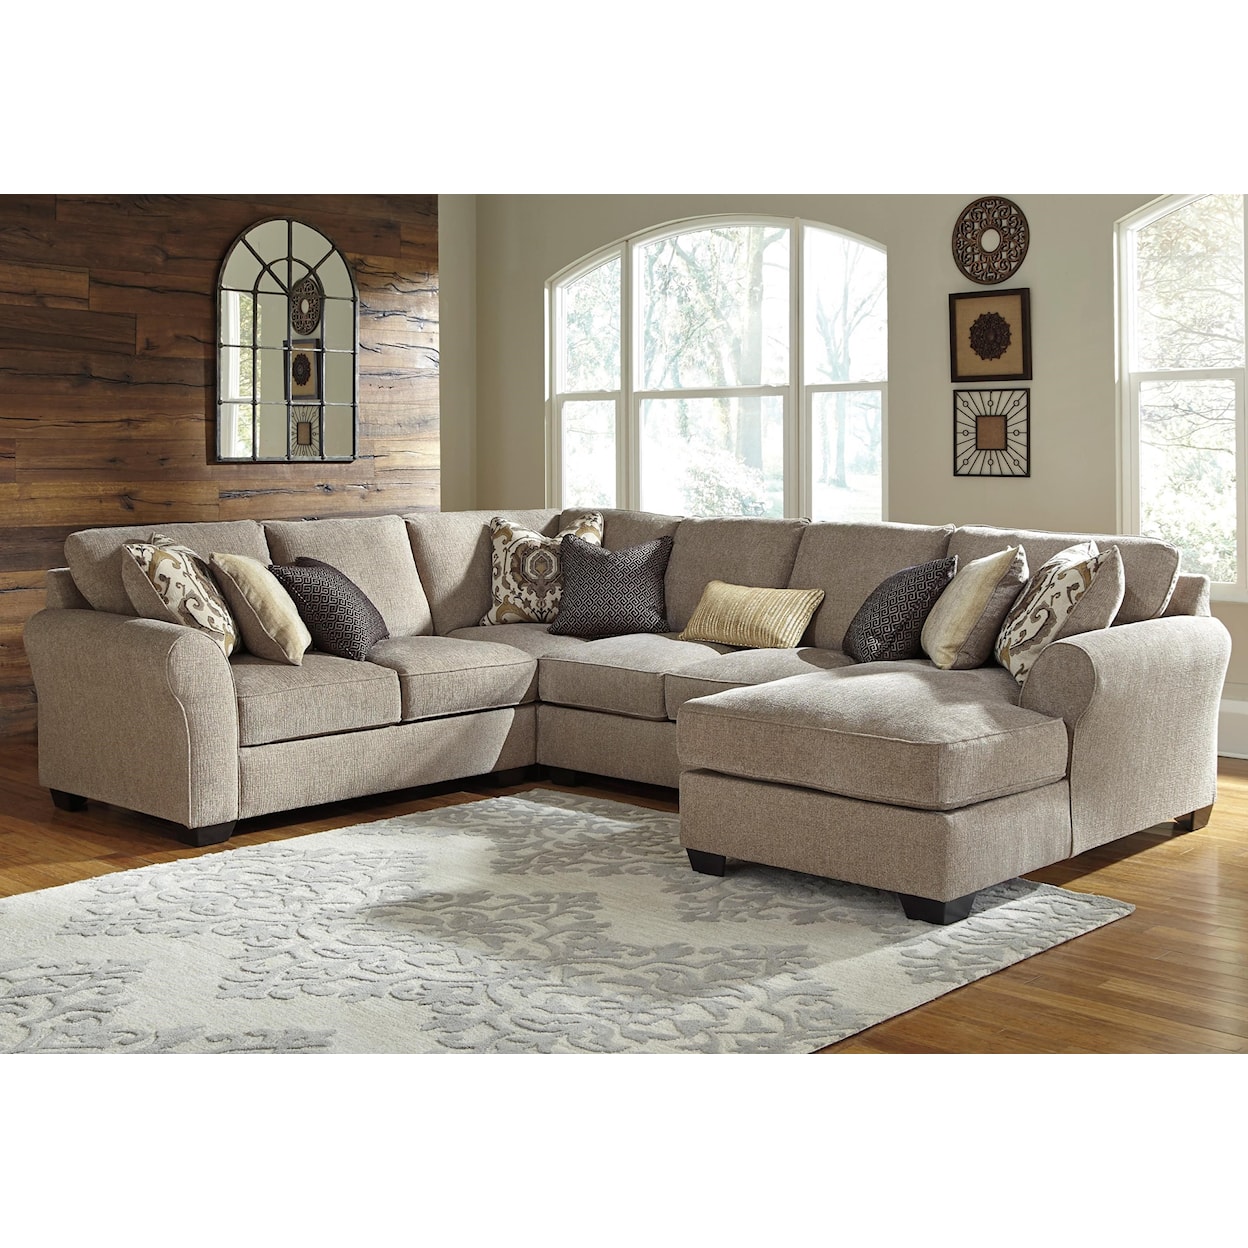 Ashley Furniture Benchcraft Pantomine 4-Piece Sectional with Chaise